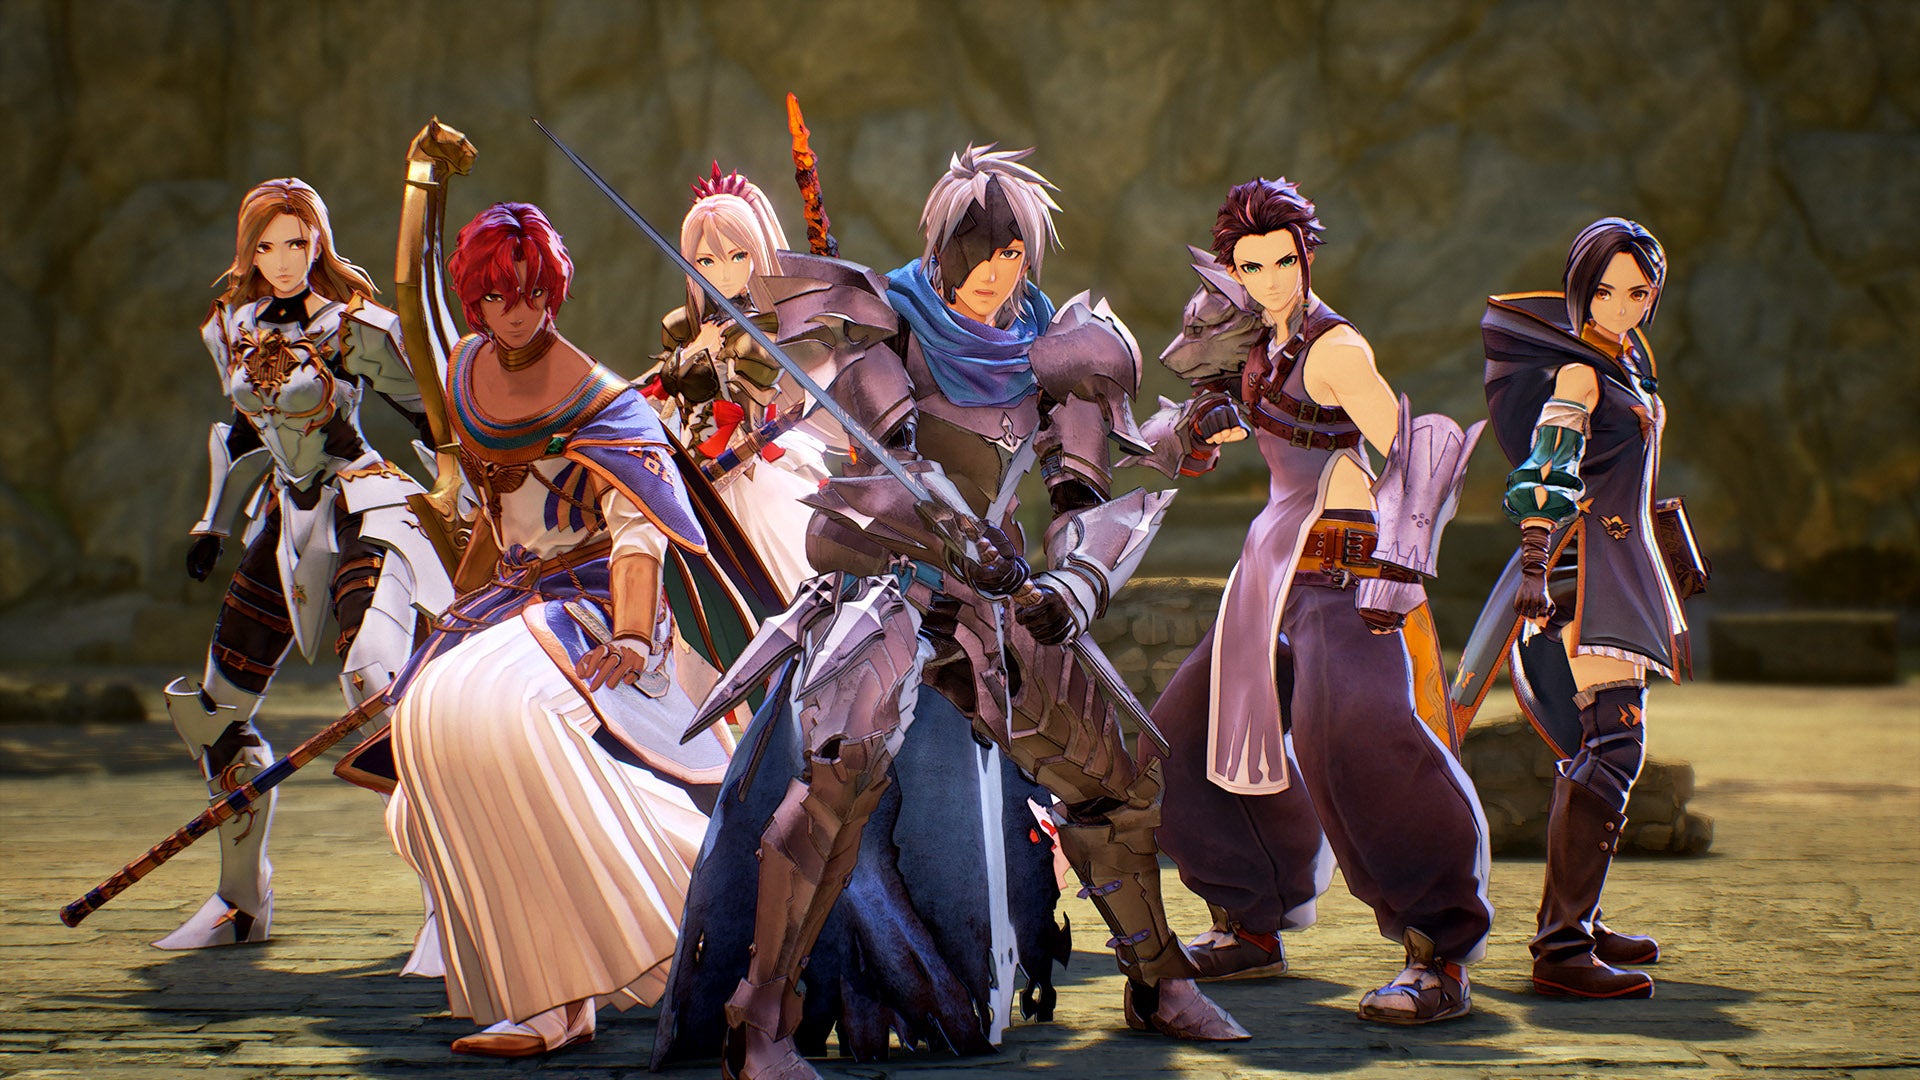 A group shot of the party members from Tales Of Arise